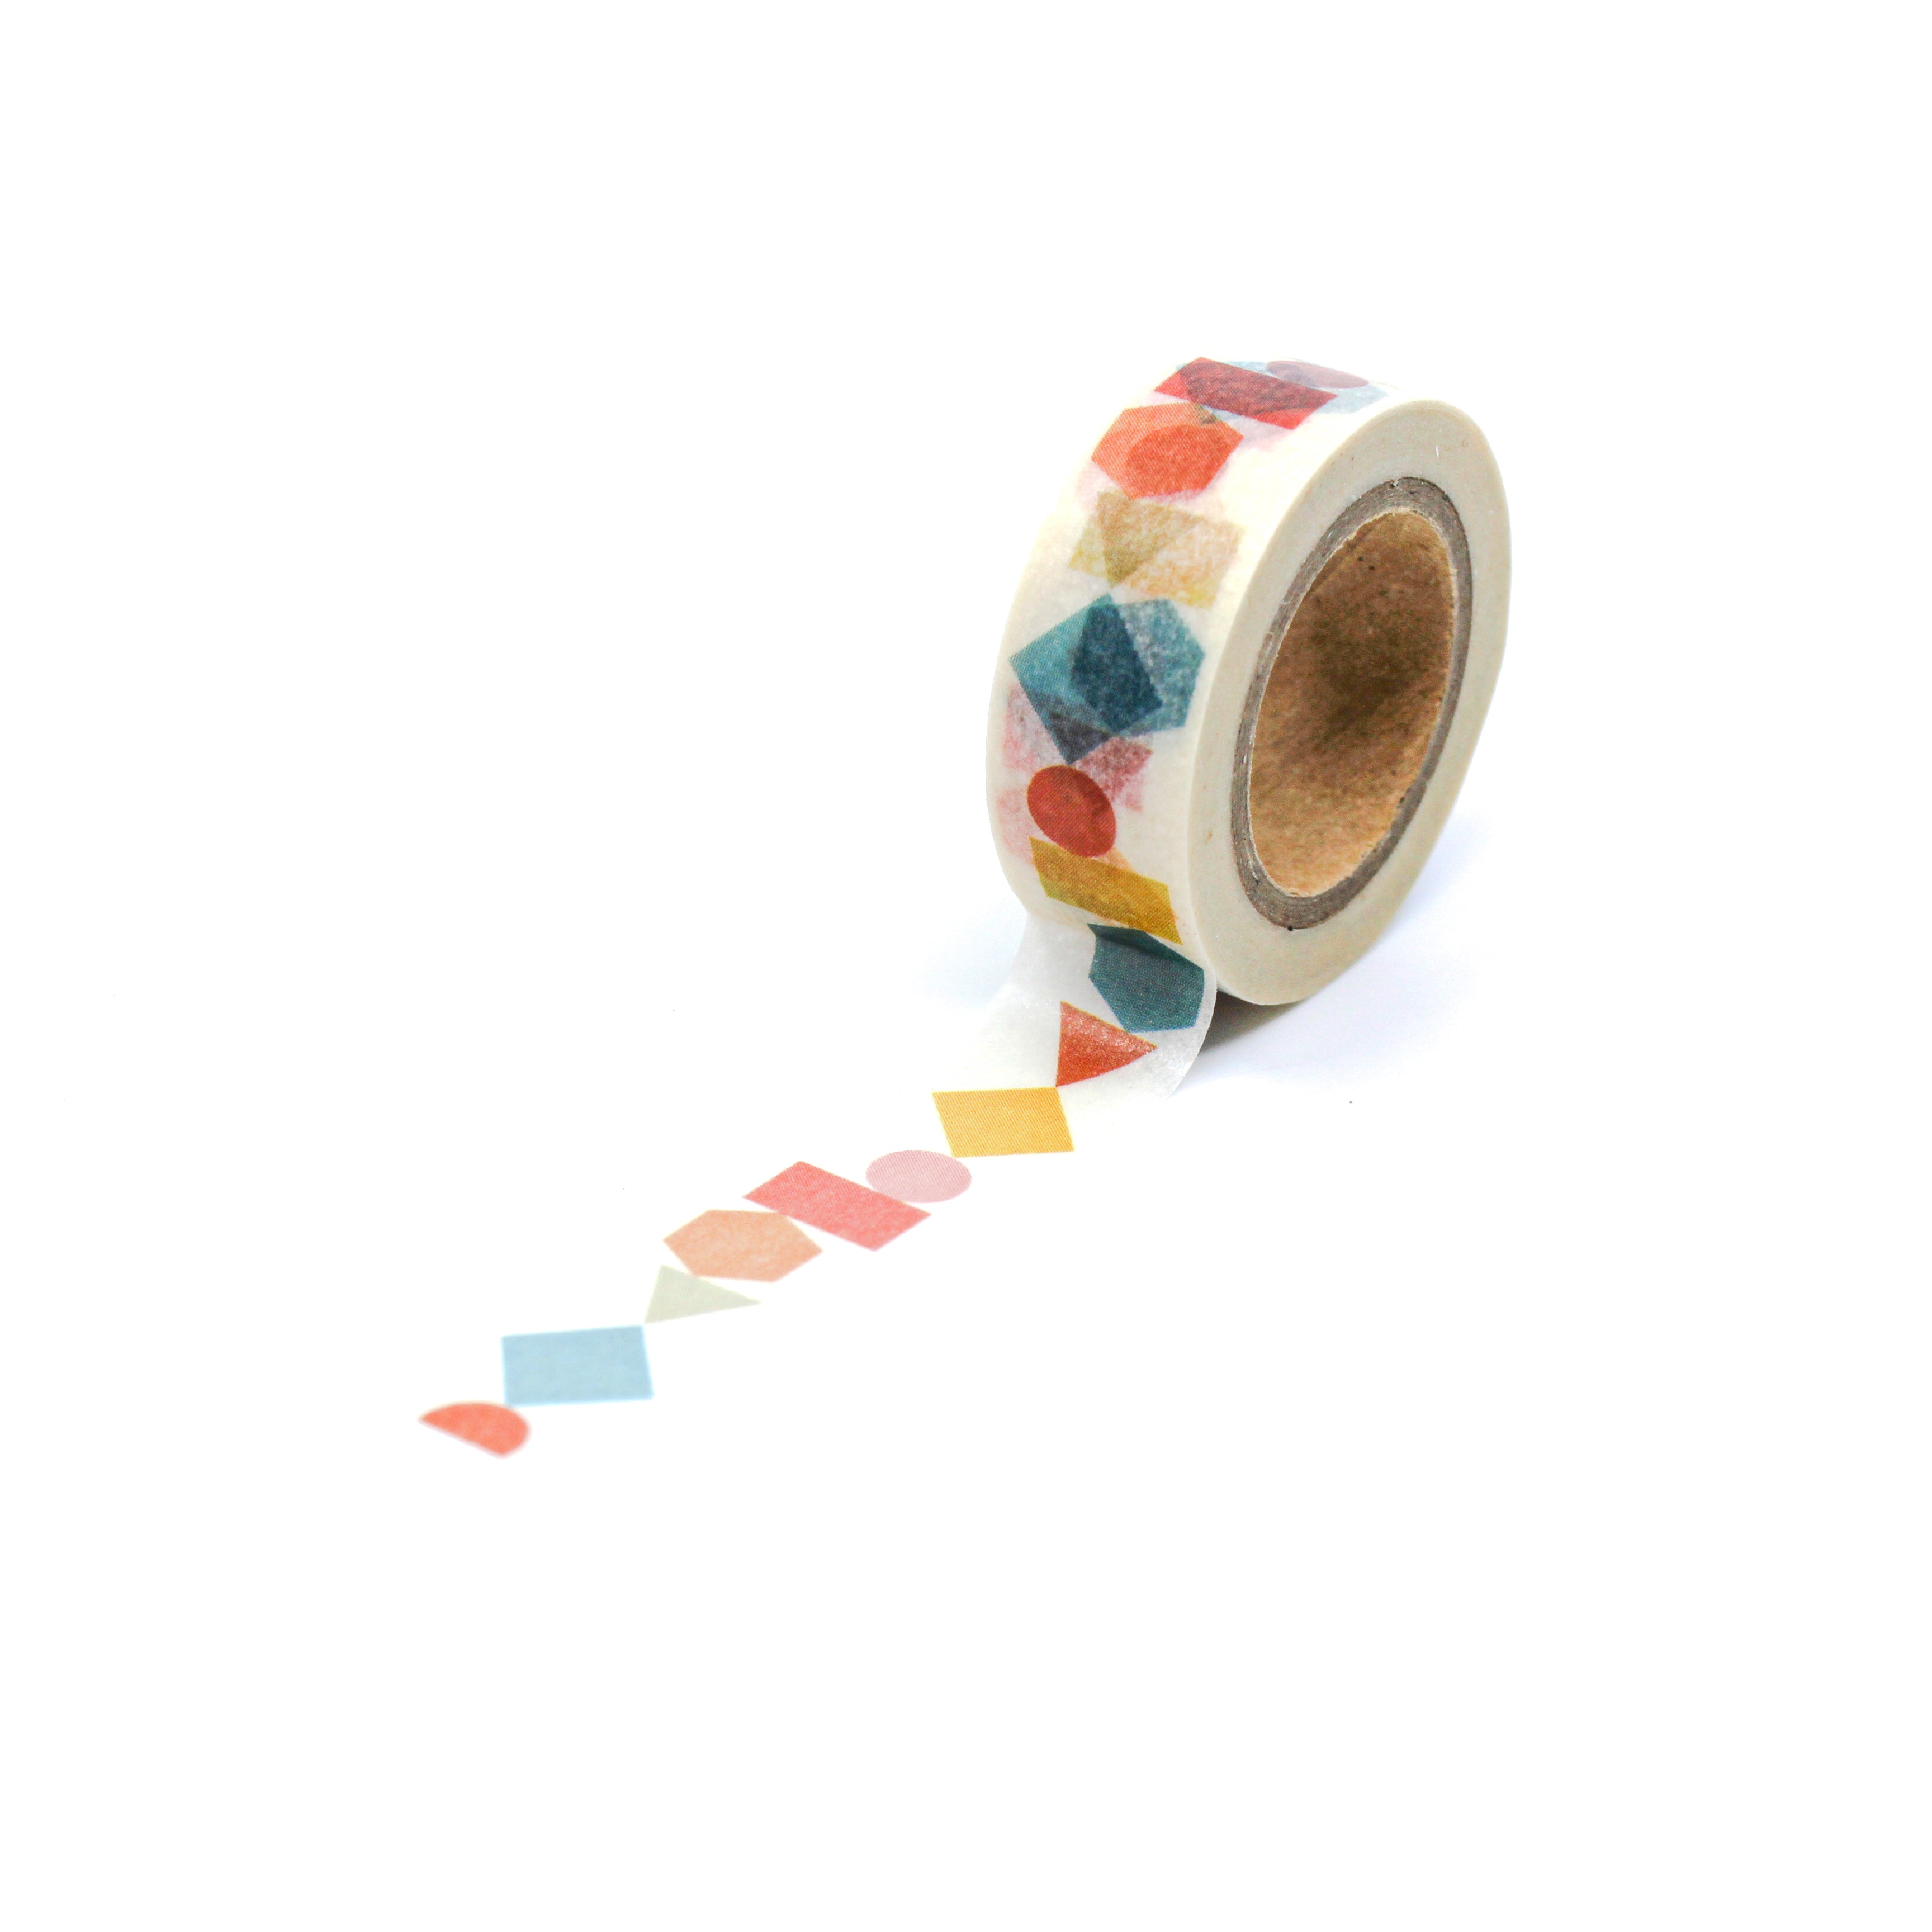 This is a full pattern repeat view of multi-color geo polygon shapes washi tape from BBB Supplies Craft Shop